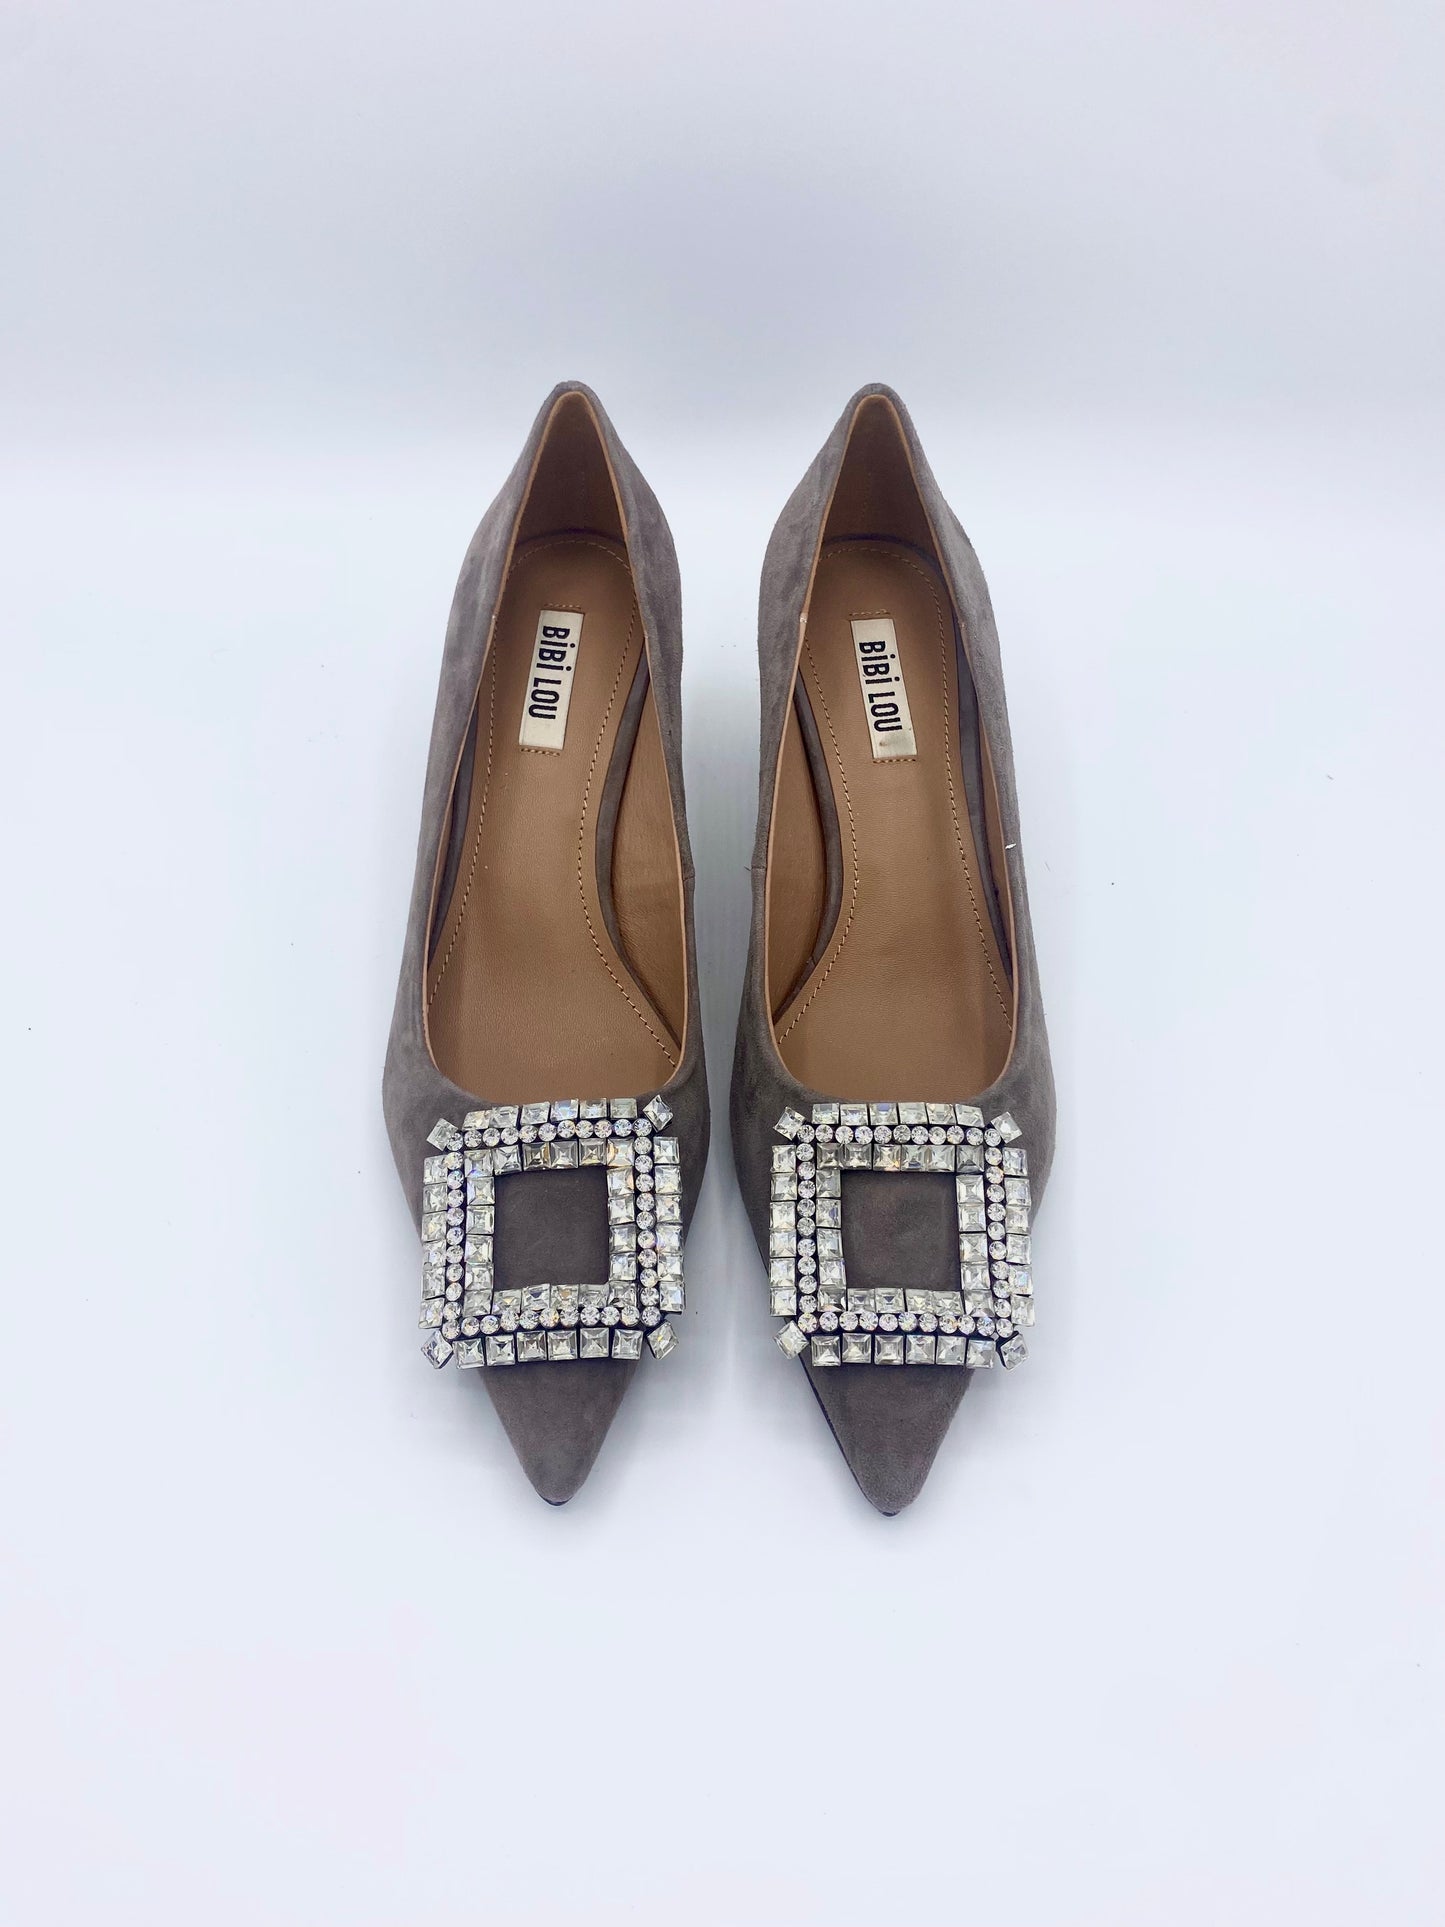 CRYSTAL PUMP VICKY GRAY TAUPE